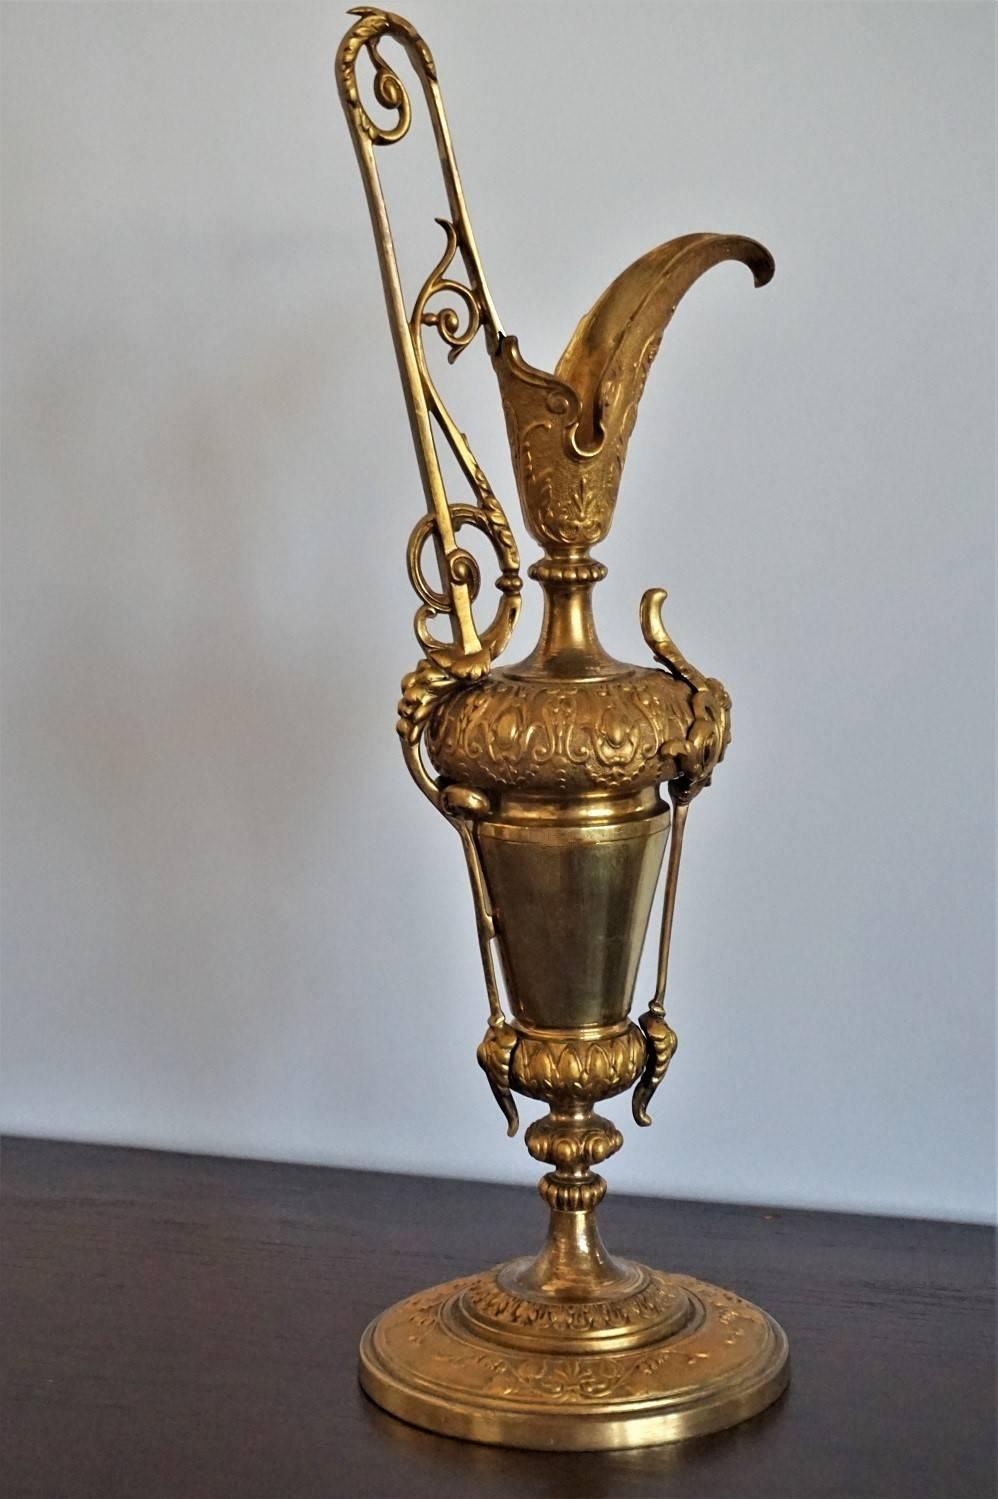 Art Nouveau solid gilt bronze and parcel brass decorative Ewer richly ornate, Spain, circa 1900-1910.

Measures:
Height 15.75 in (40 cm)
Width 5.15 (13 cm)
Depth 5.15 (13 cm).

Very good condition with beautiful patina of age.